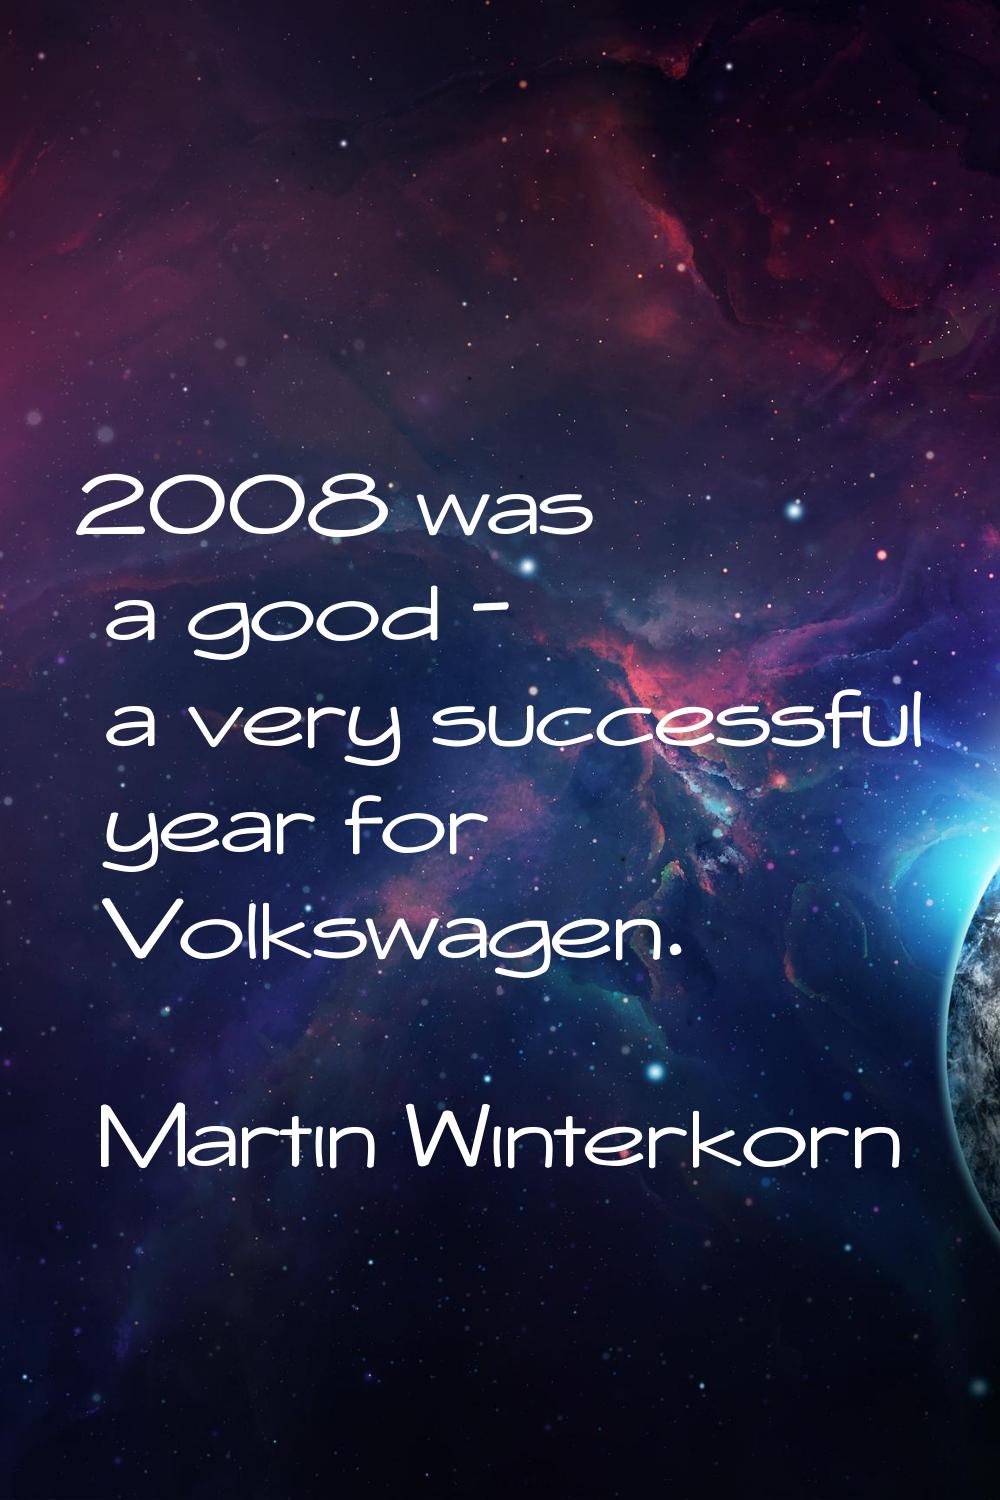 2008 was a good - a very successful year for Volkswagen.